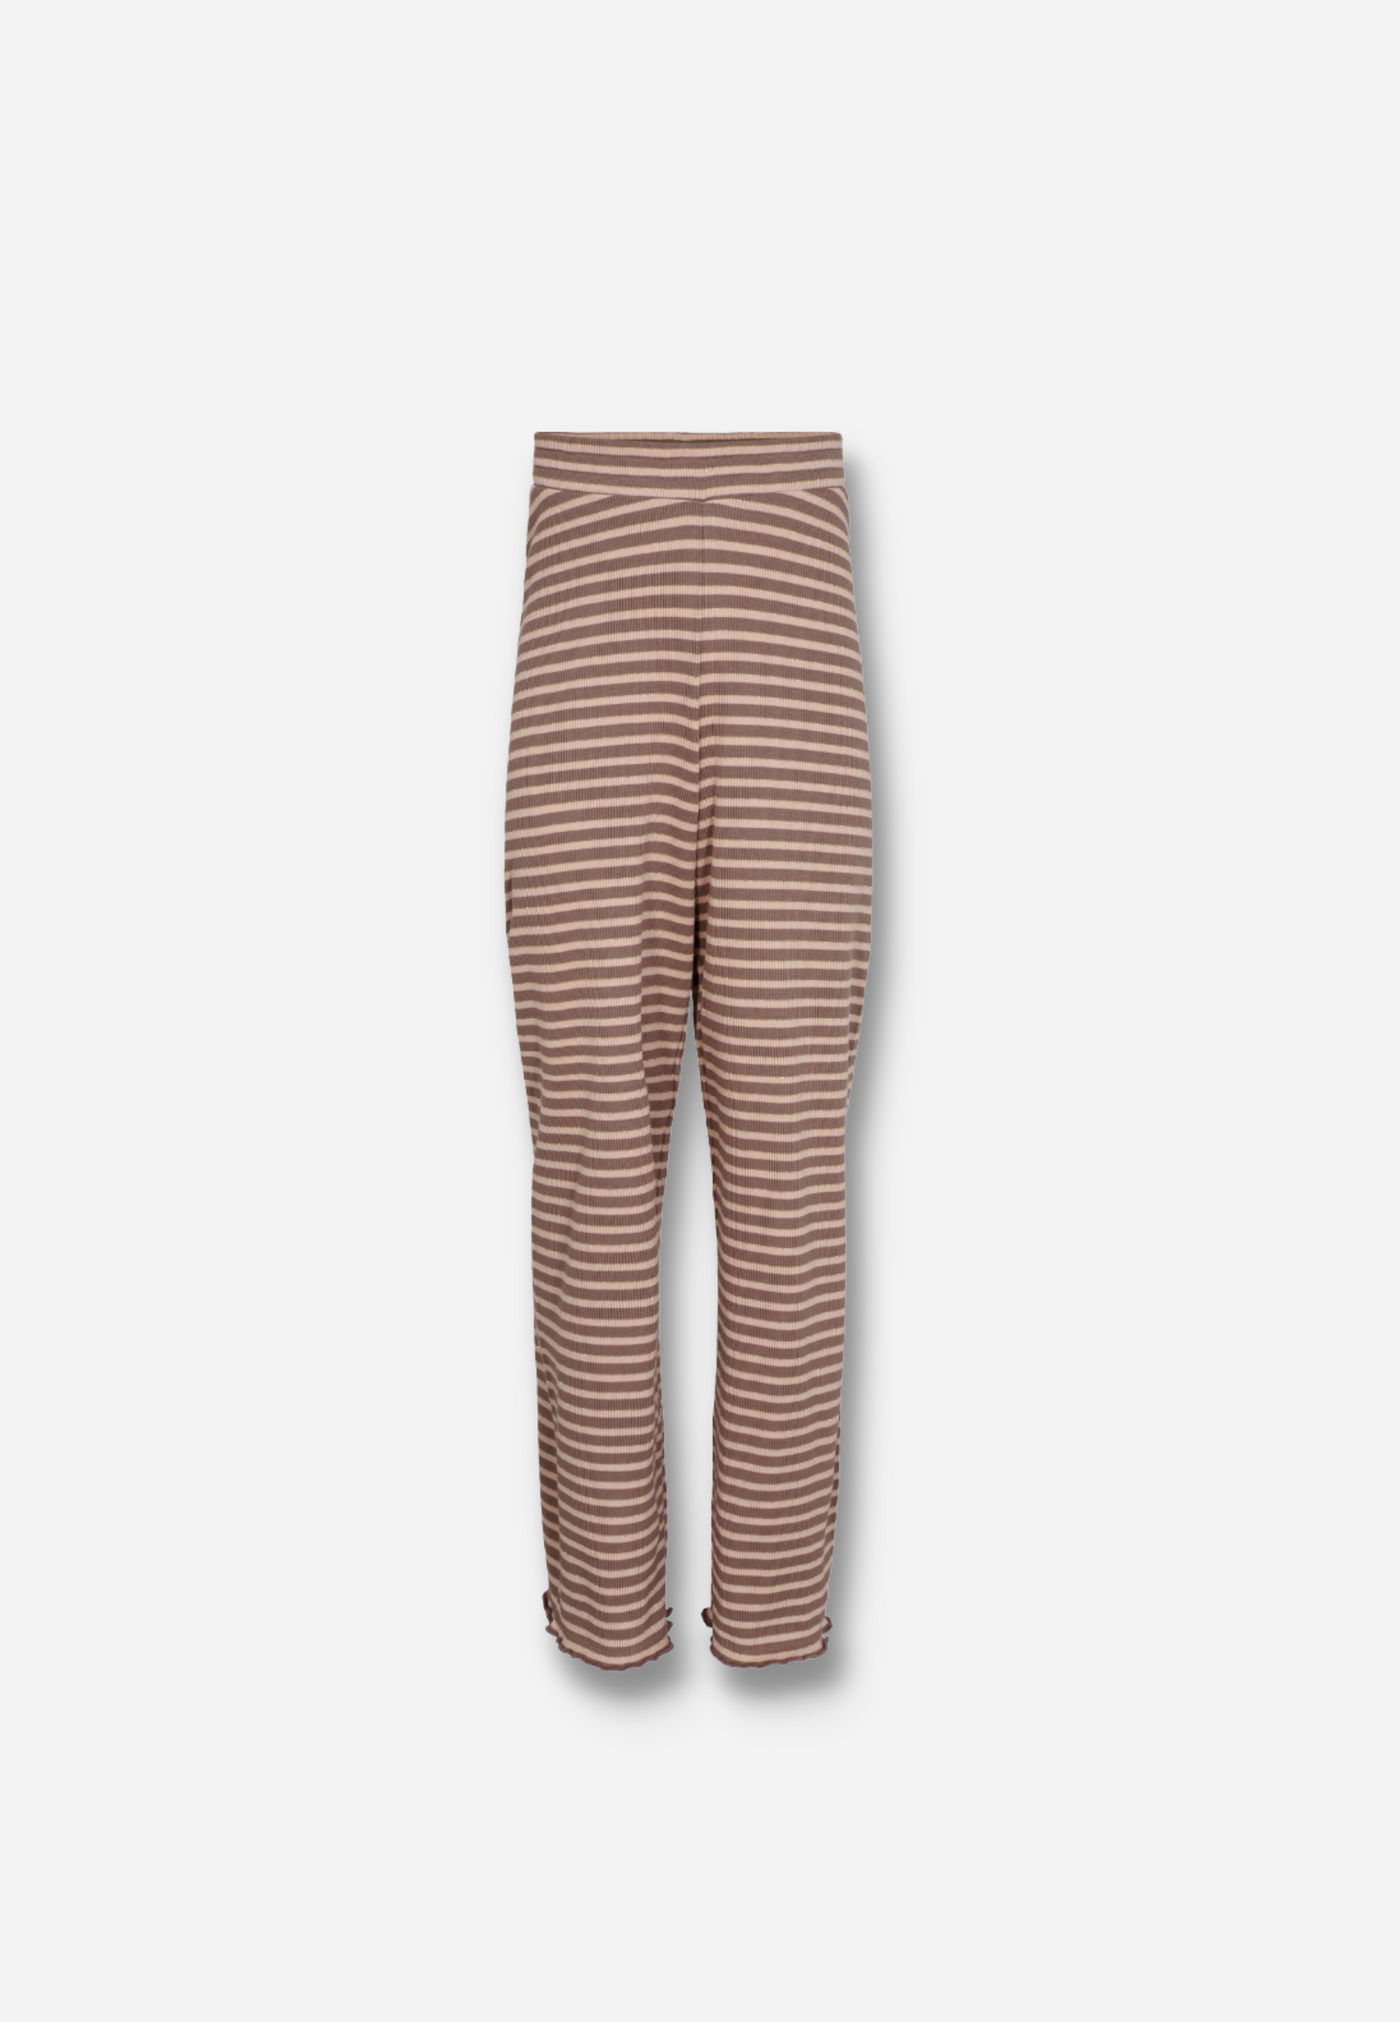 TROUSERS - WARM BROWN